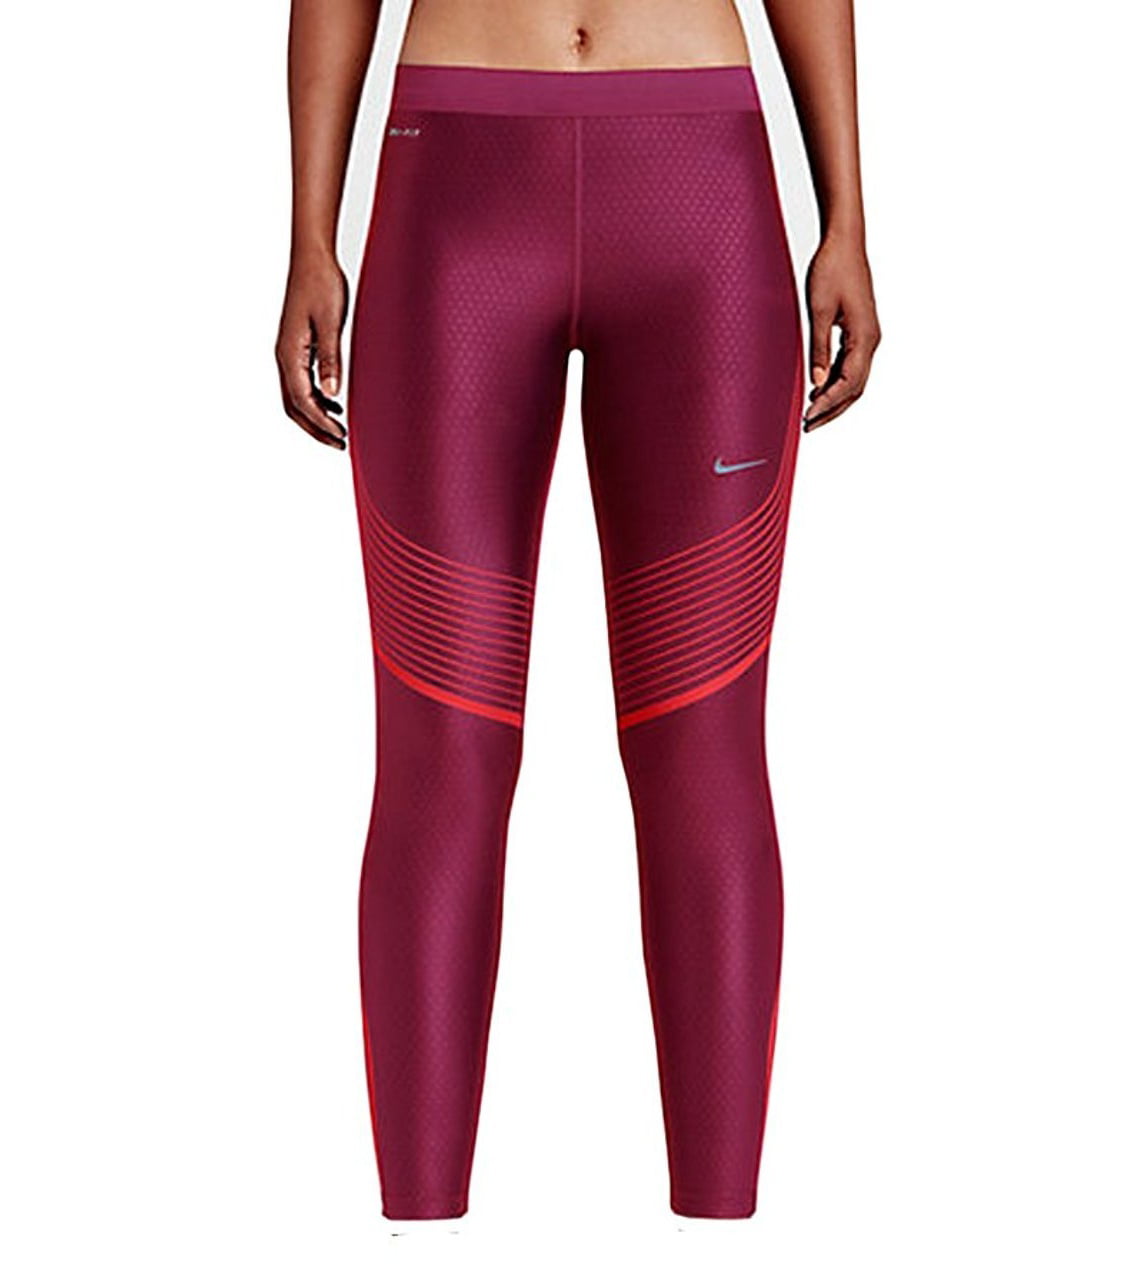 Nike Power Speed Women's Running Tights Athletic Pants